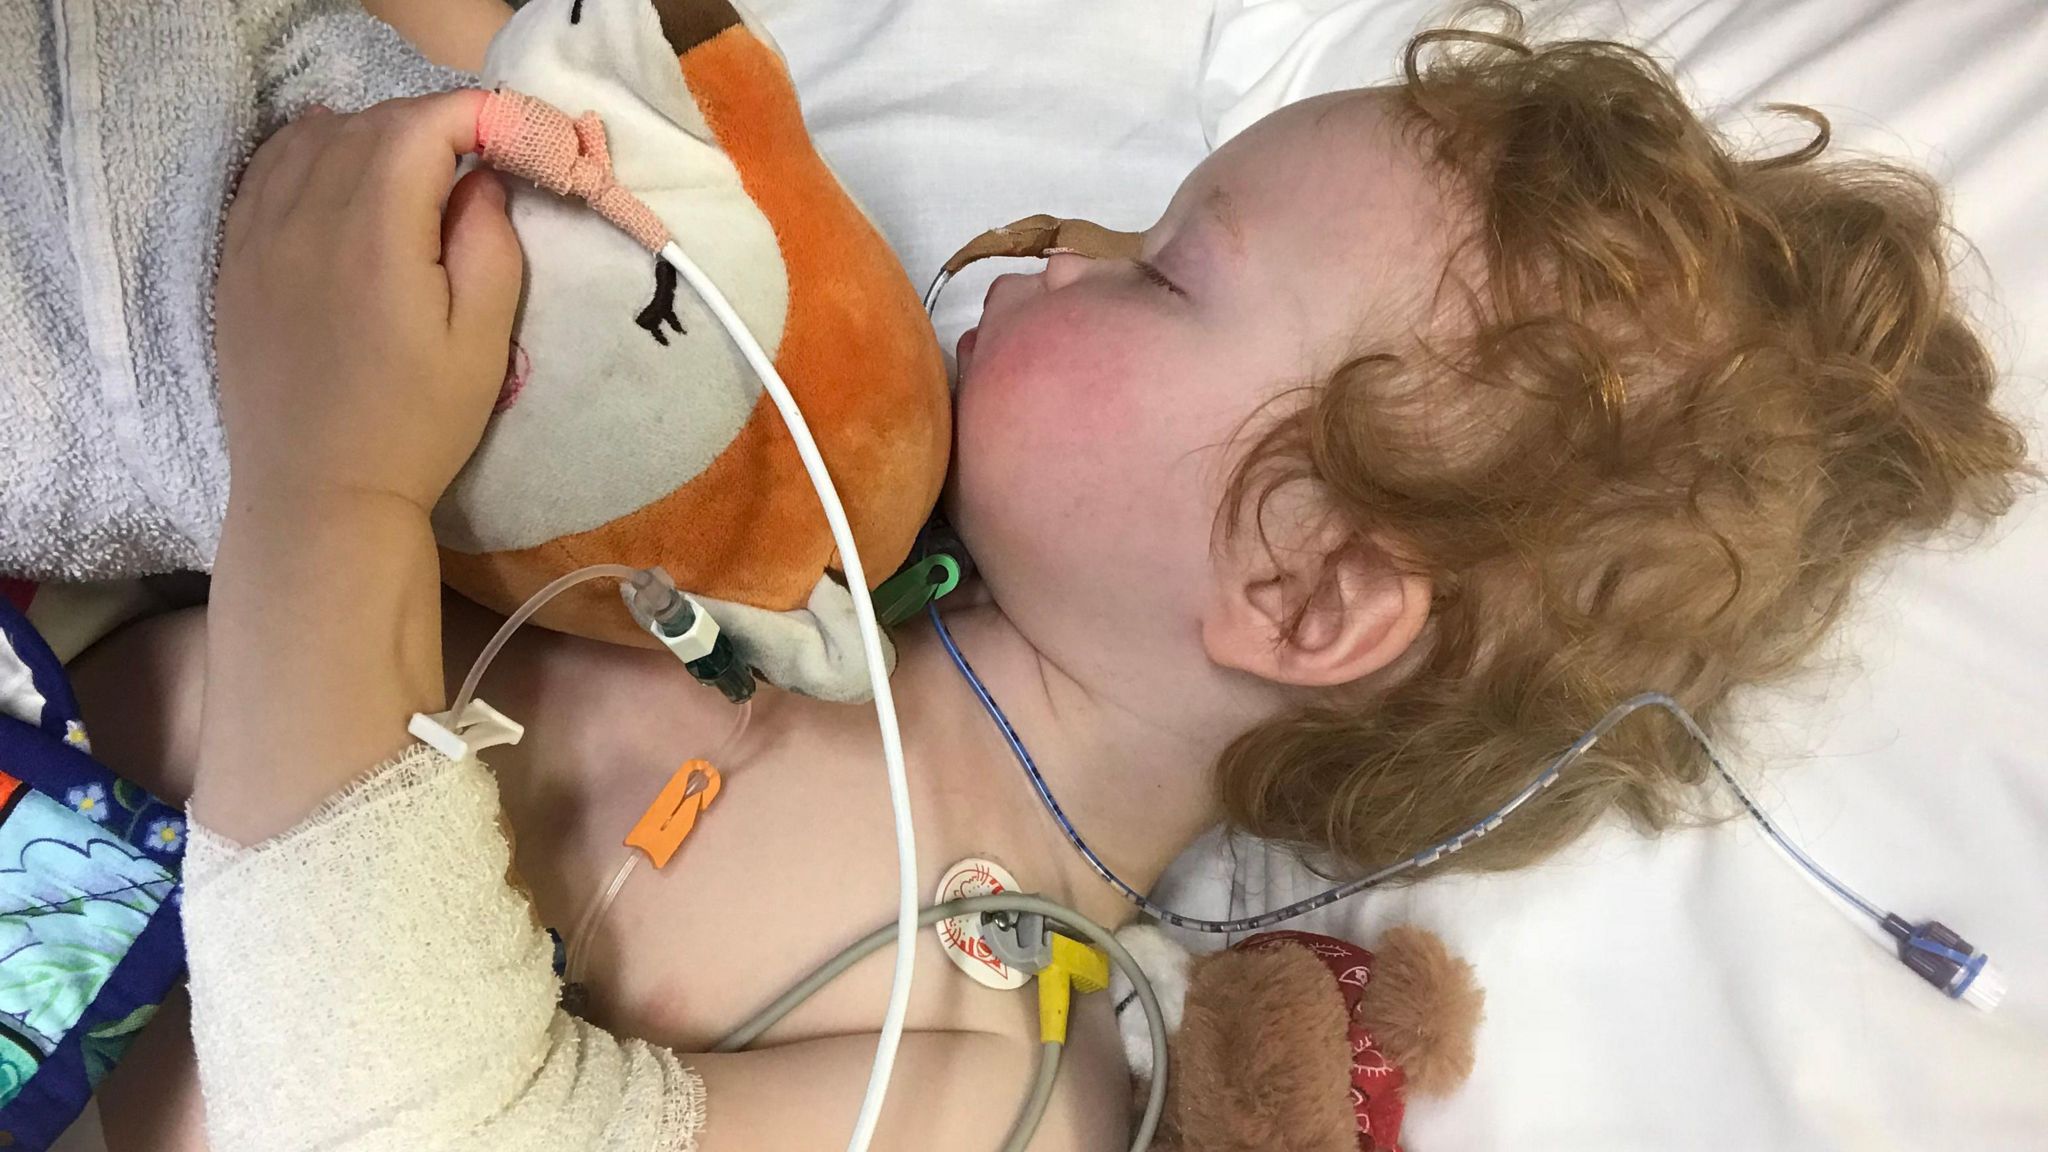 Baby Henry cuddling a teddy and laying in a hospital bed with multiple tubes and wires attached to his body